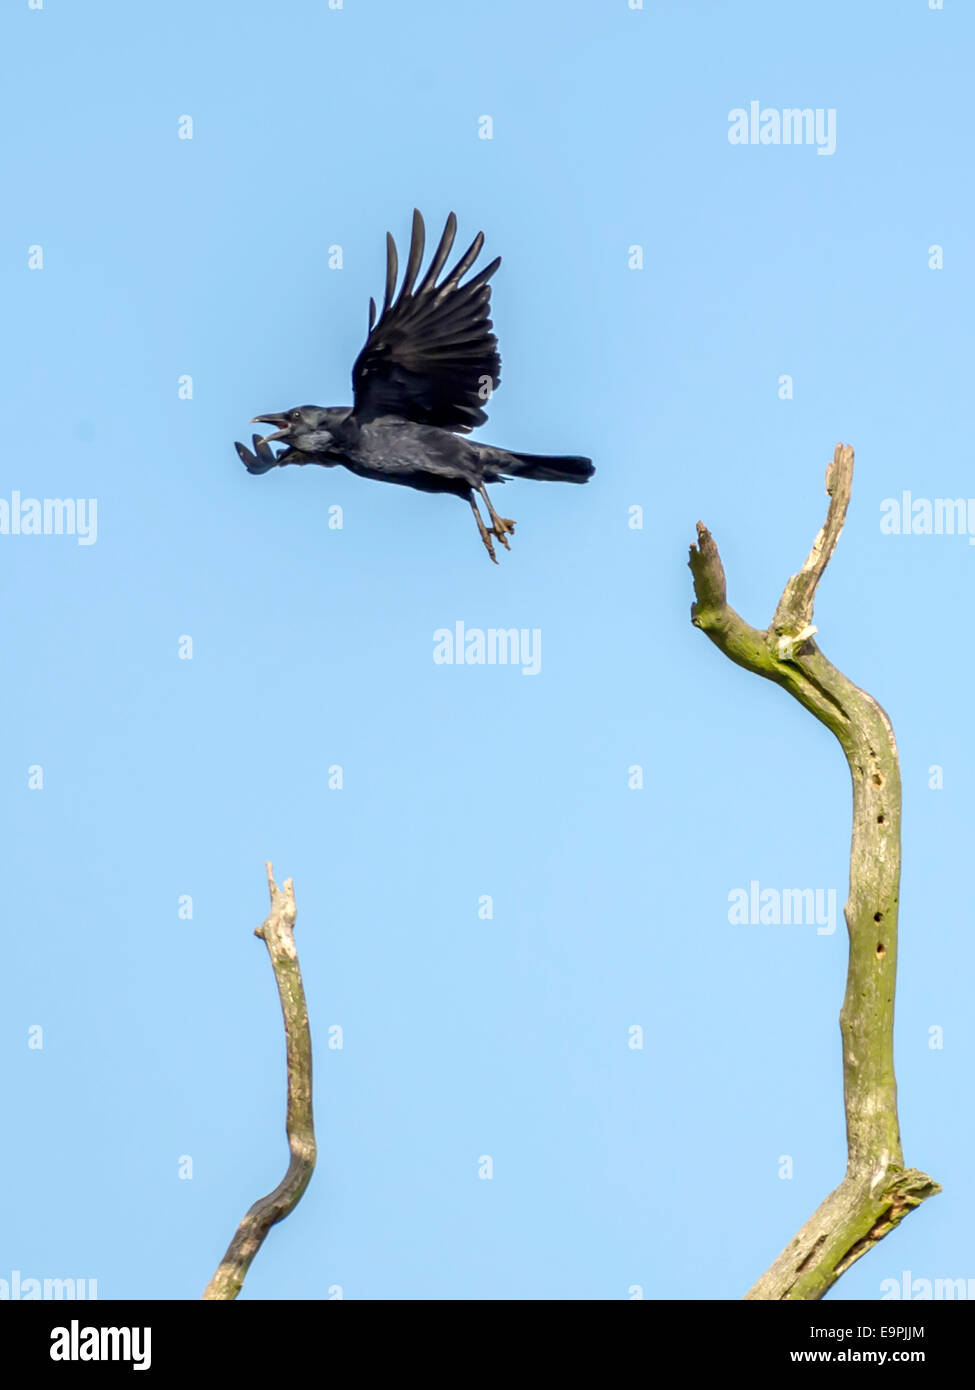 Wild Crow [Corvus] taking off from a branch of a gnarled old tree with a blue sky forming the background. Stock Photo